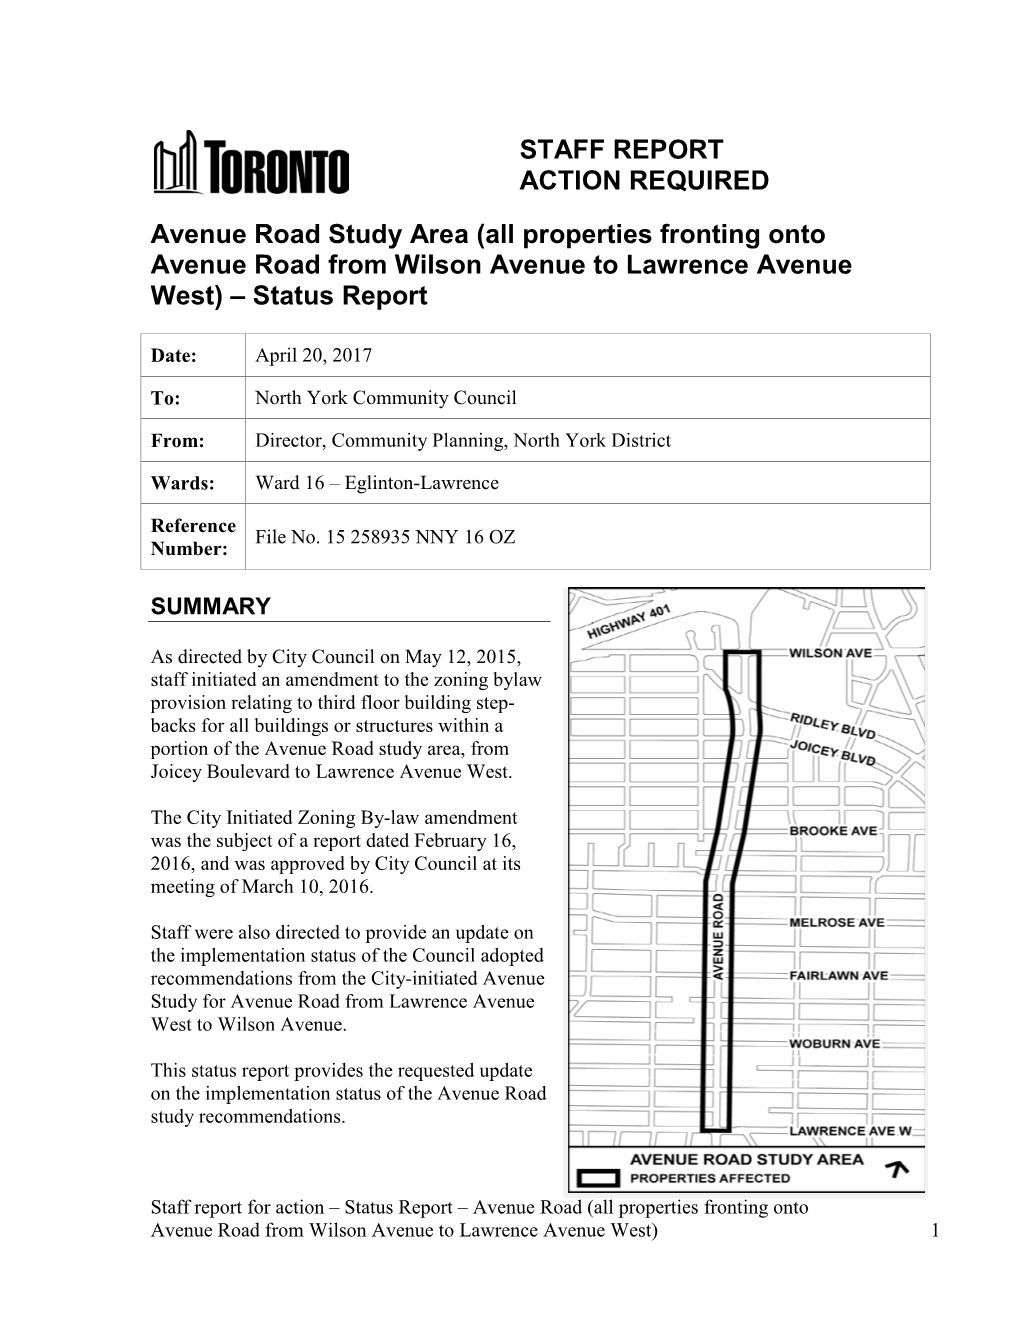 Avenue Road Study Area (All Properties Fronting Onto Avenue Road from Wilson Avenue to Lawrence Avenue West) – Status Report